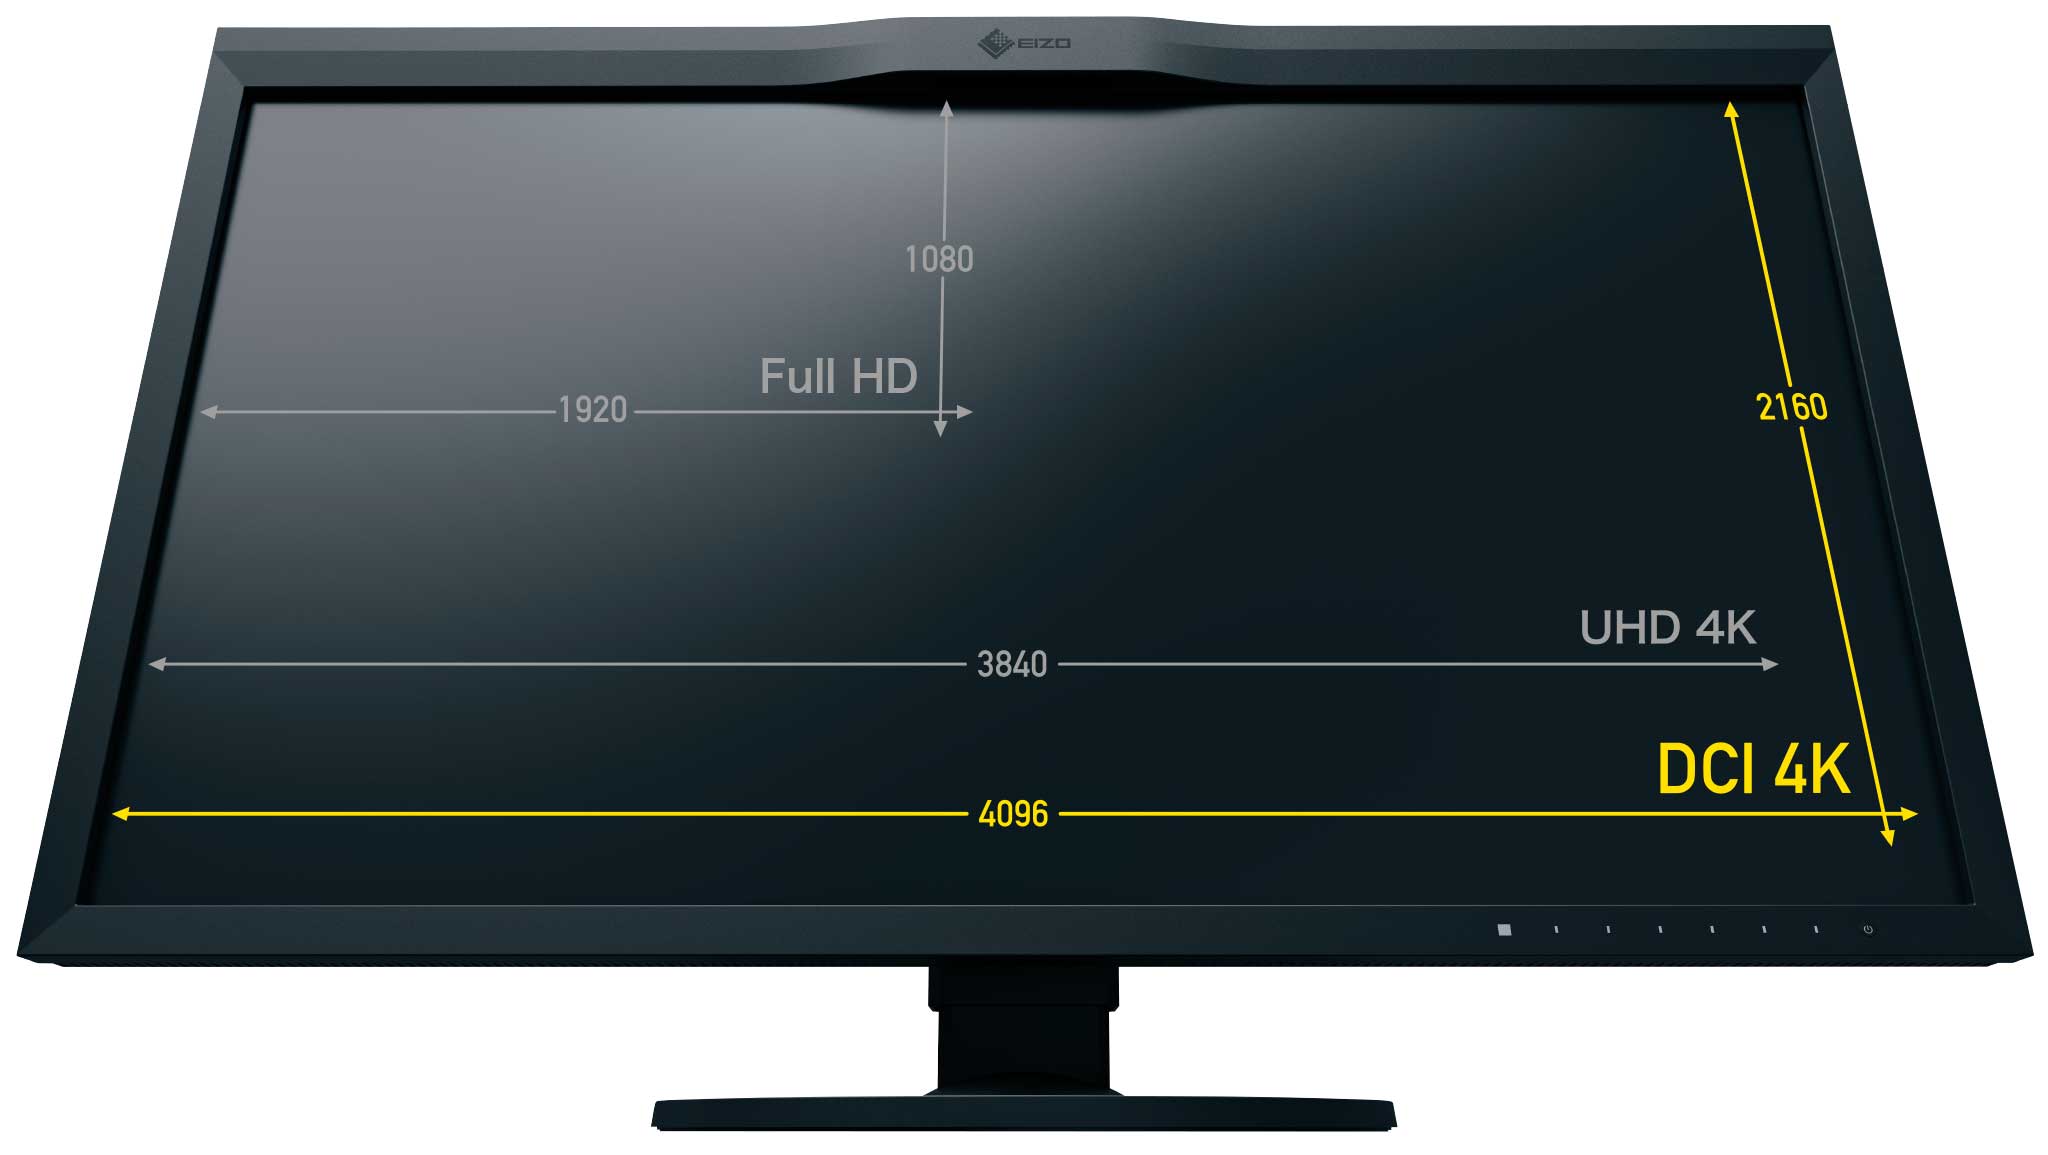 front view of the eizo coloredge cg319x monitor with the screen angled showing the resolution